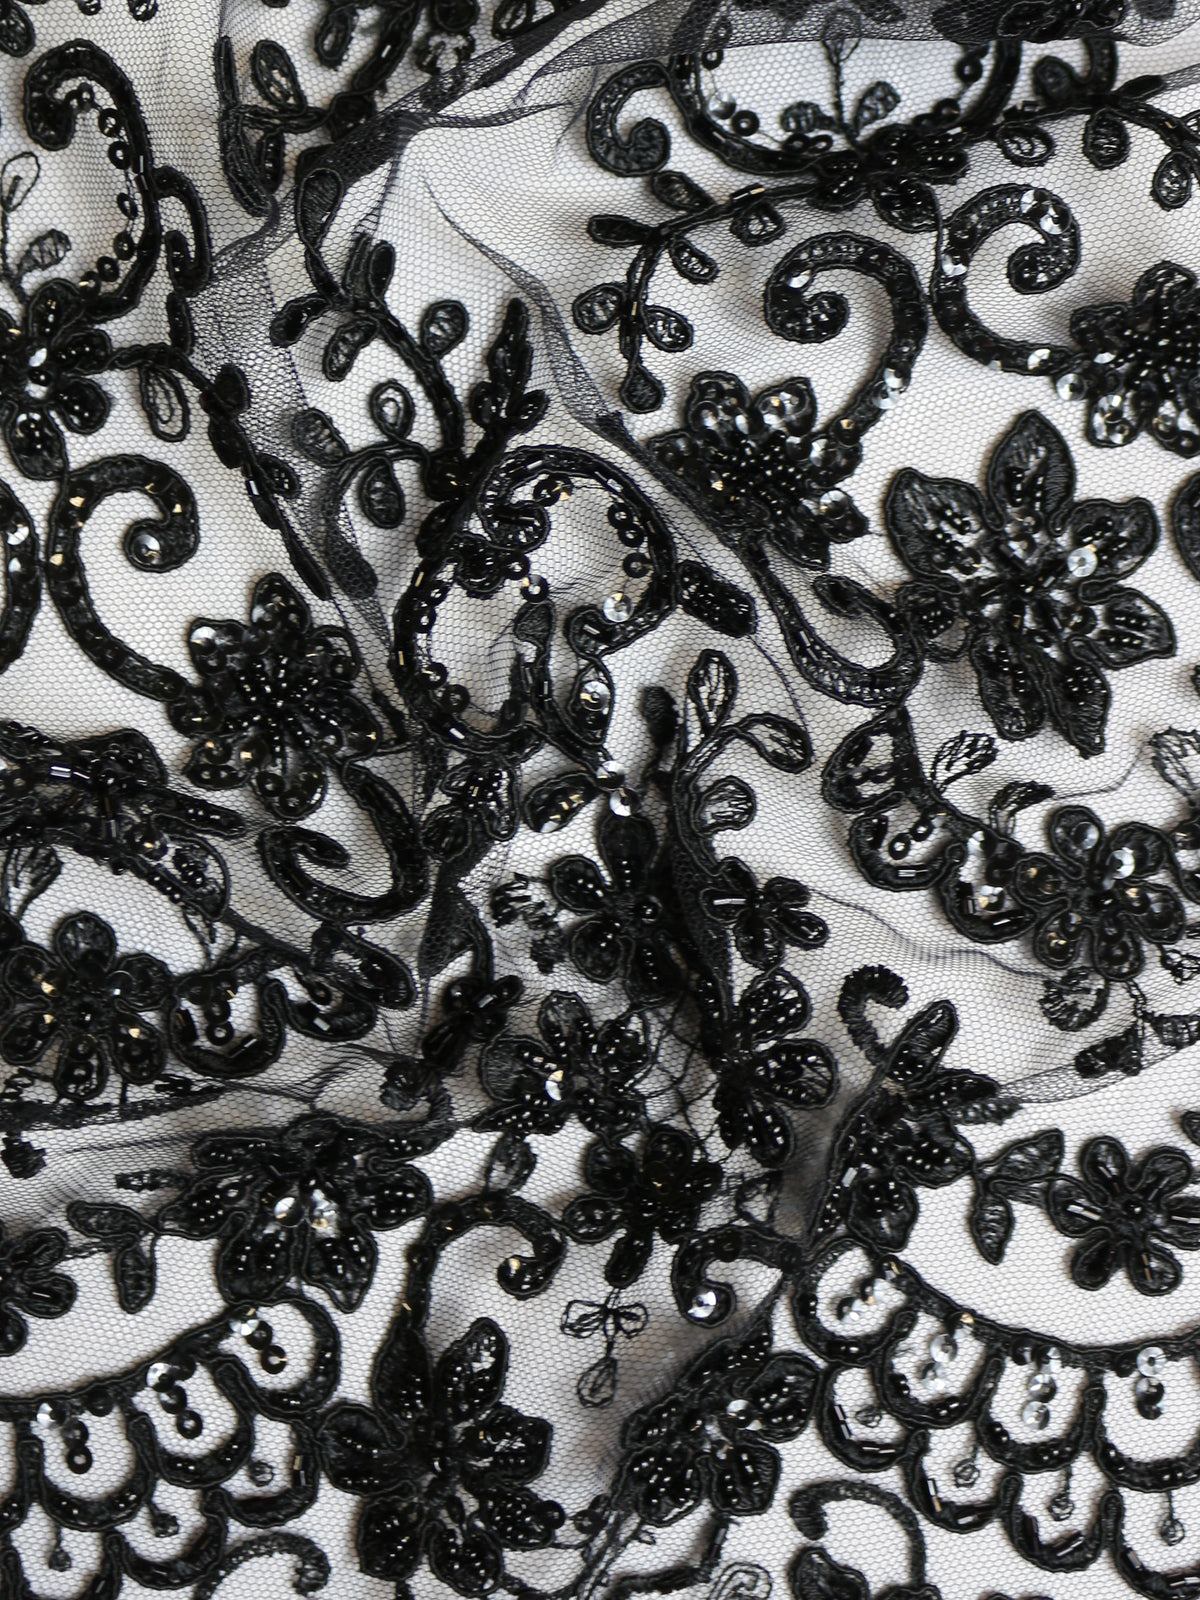 Lace Fabric - Black, White, Embroidered & More